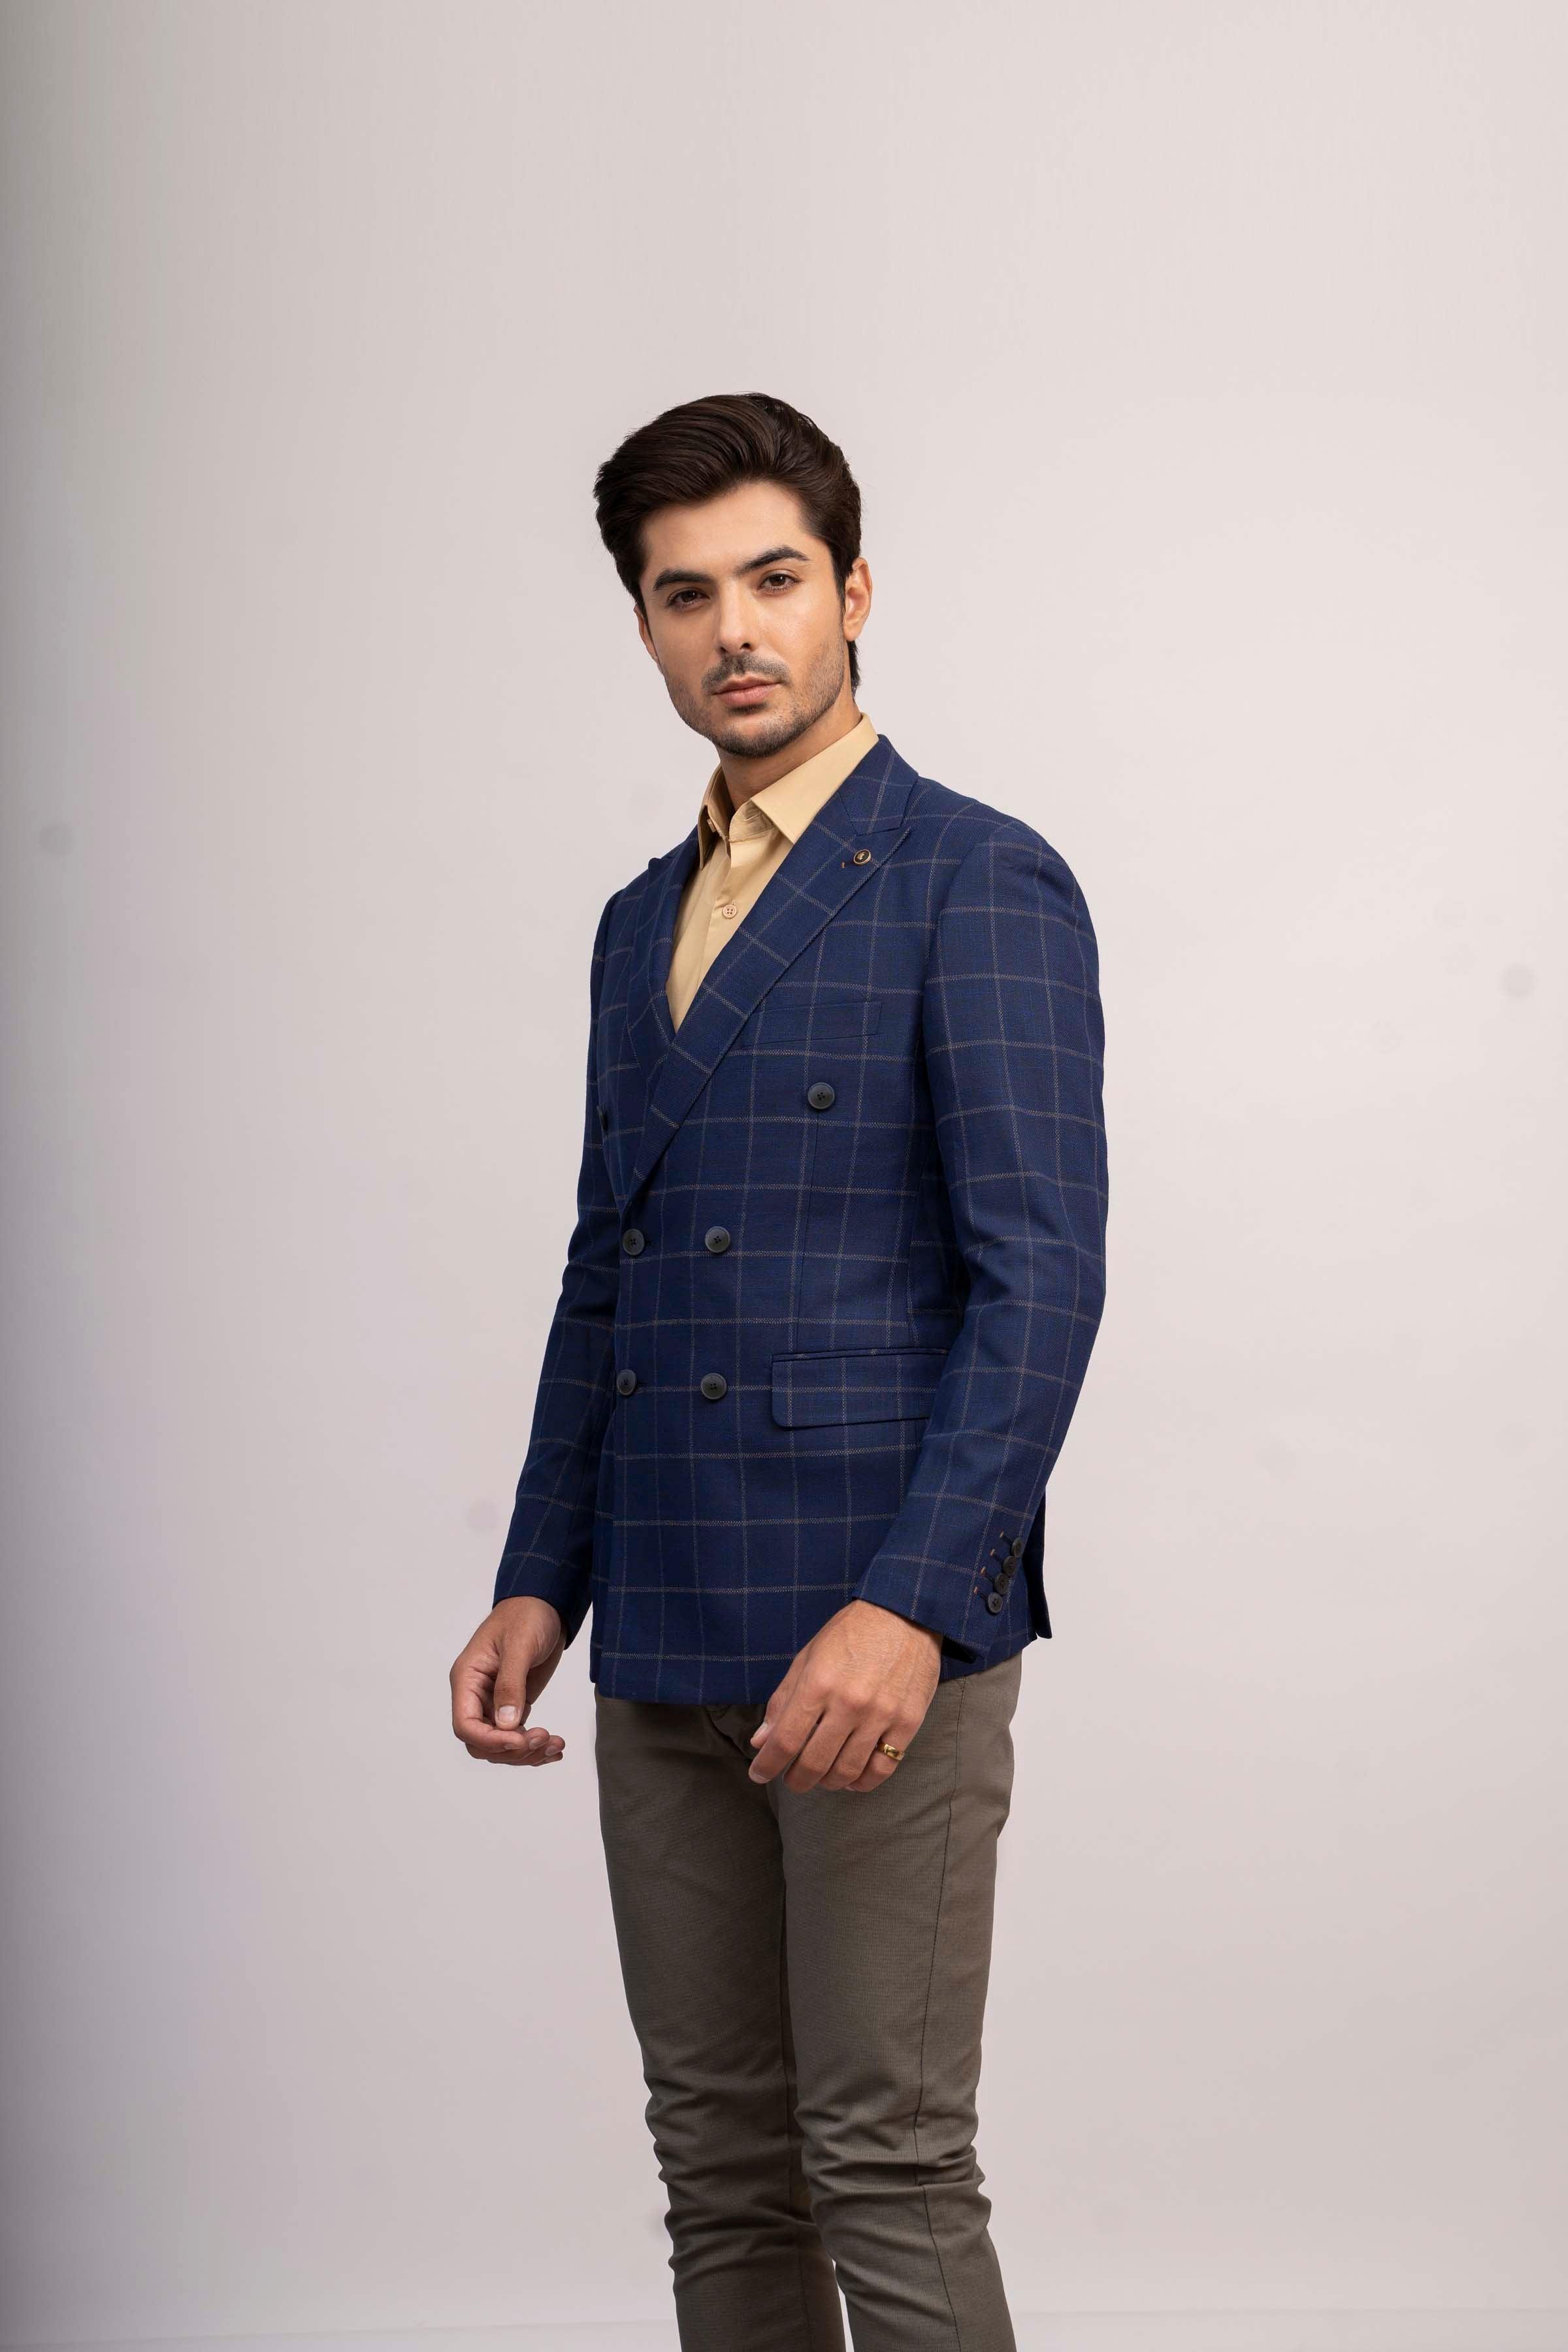 CASUAL COAT SLIM FIT NAVY BLUE at Charcoal Clothing